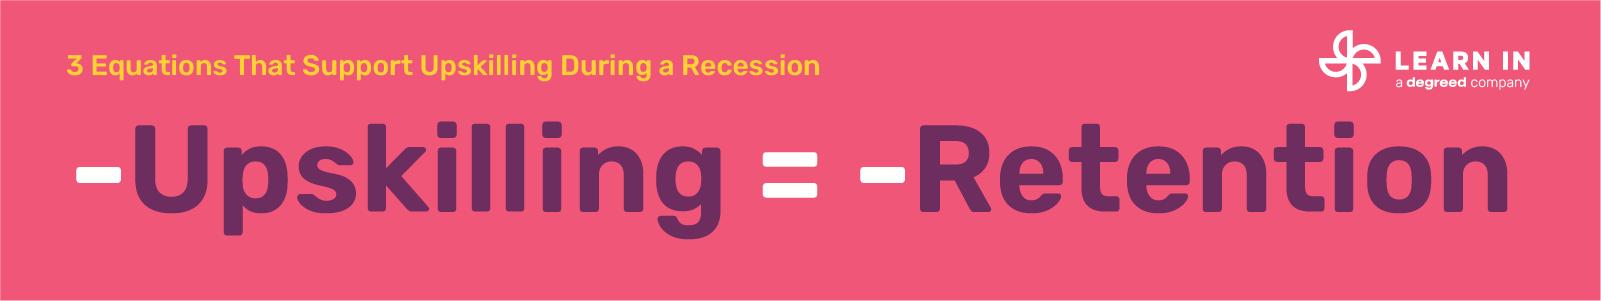 3. Less upskilling equals lower retention in a recession